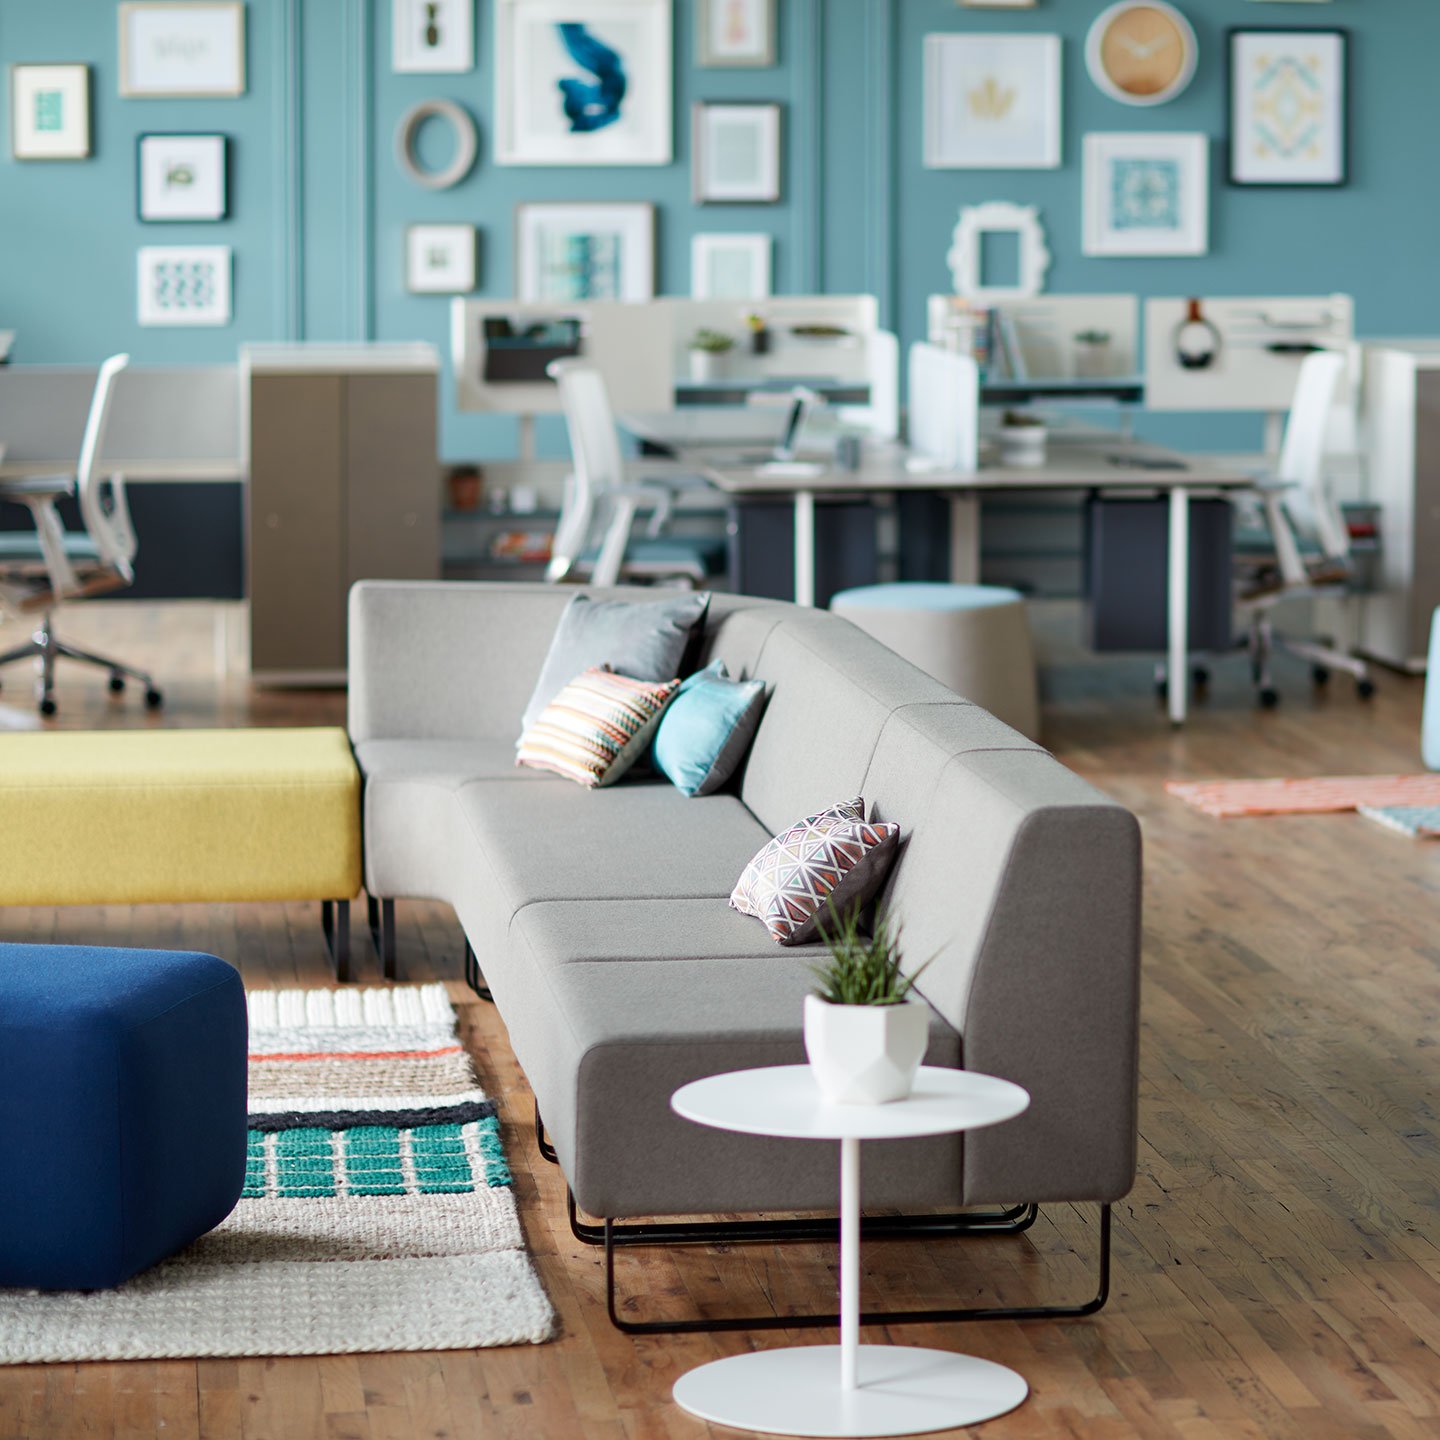 Haworth Riverbend and Pebble Booth in grey color with yellow and blue ottomans and white side table in open office space